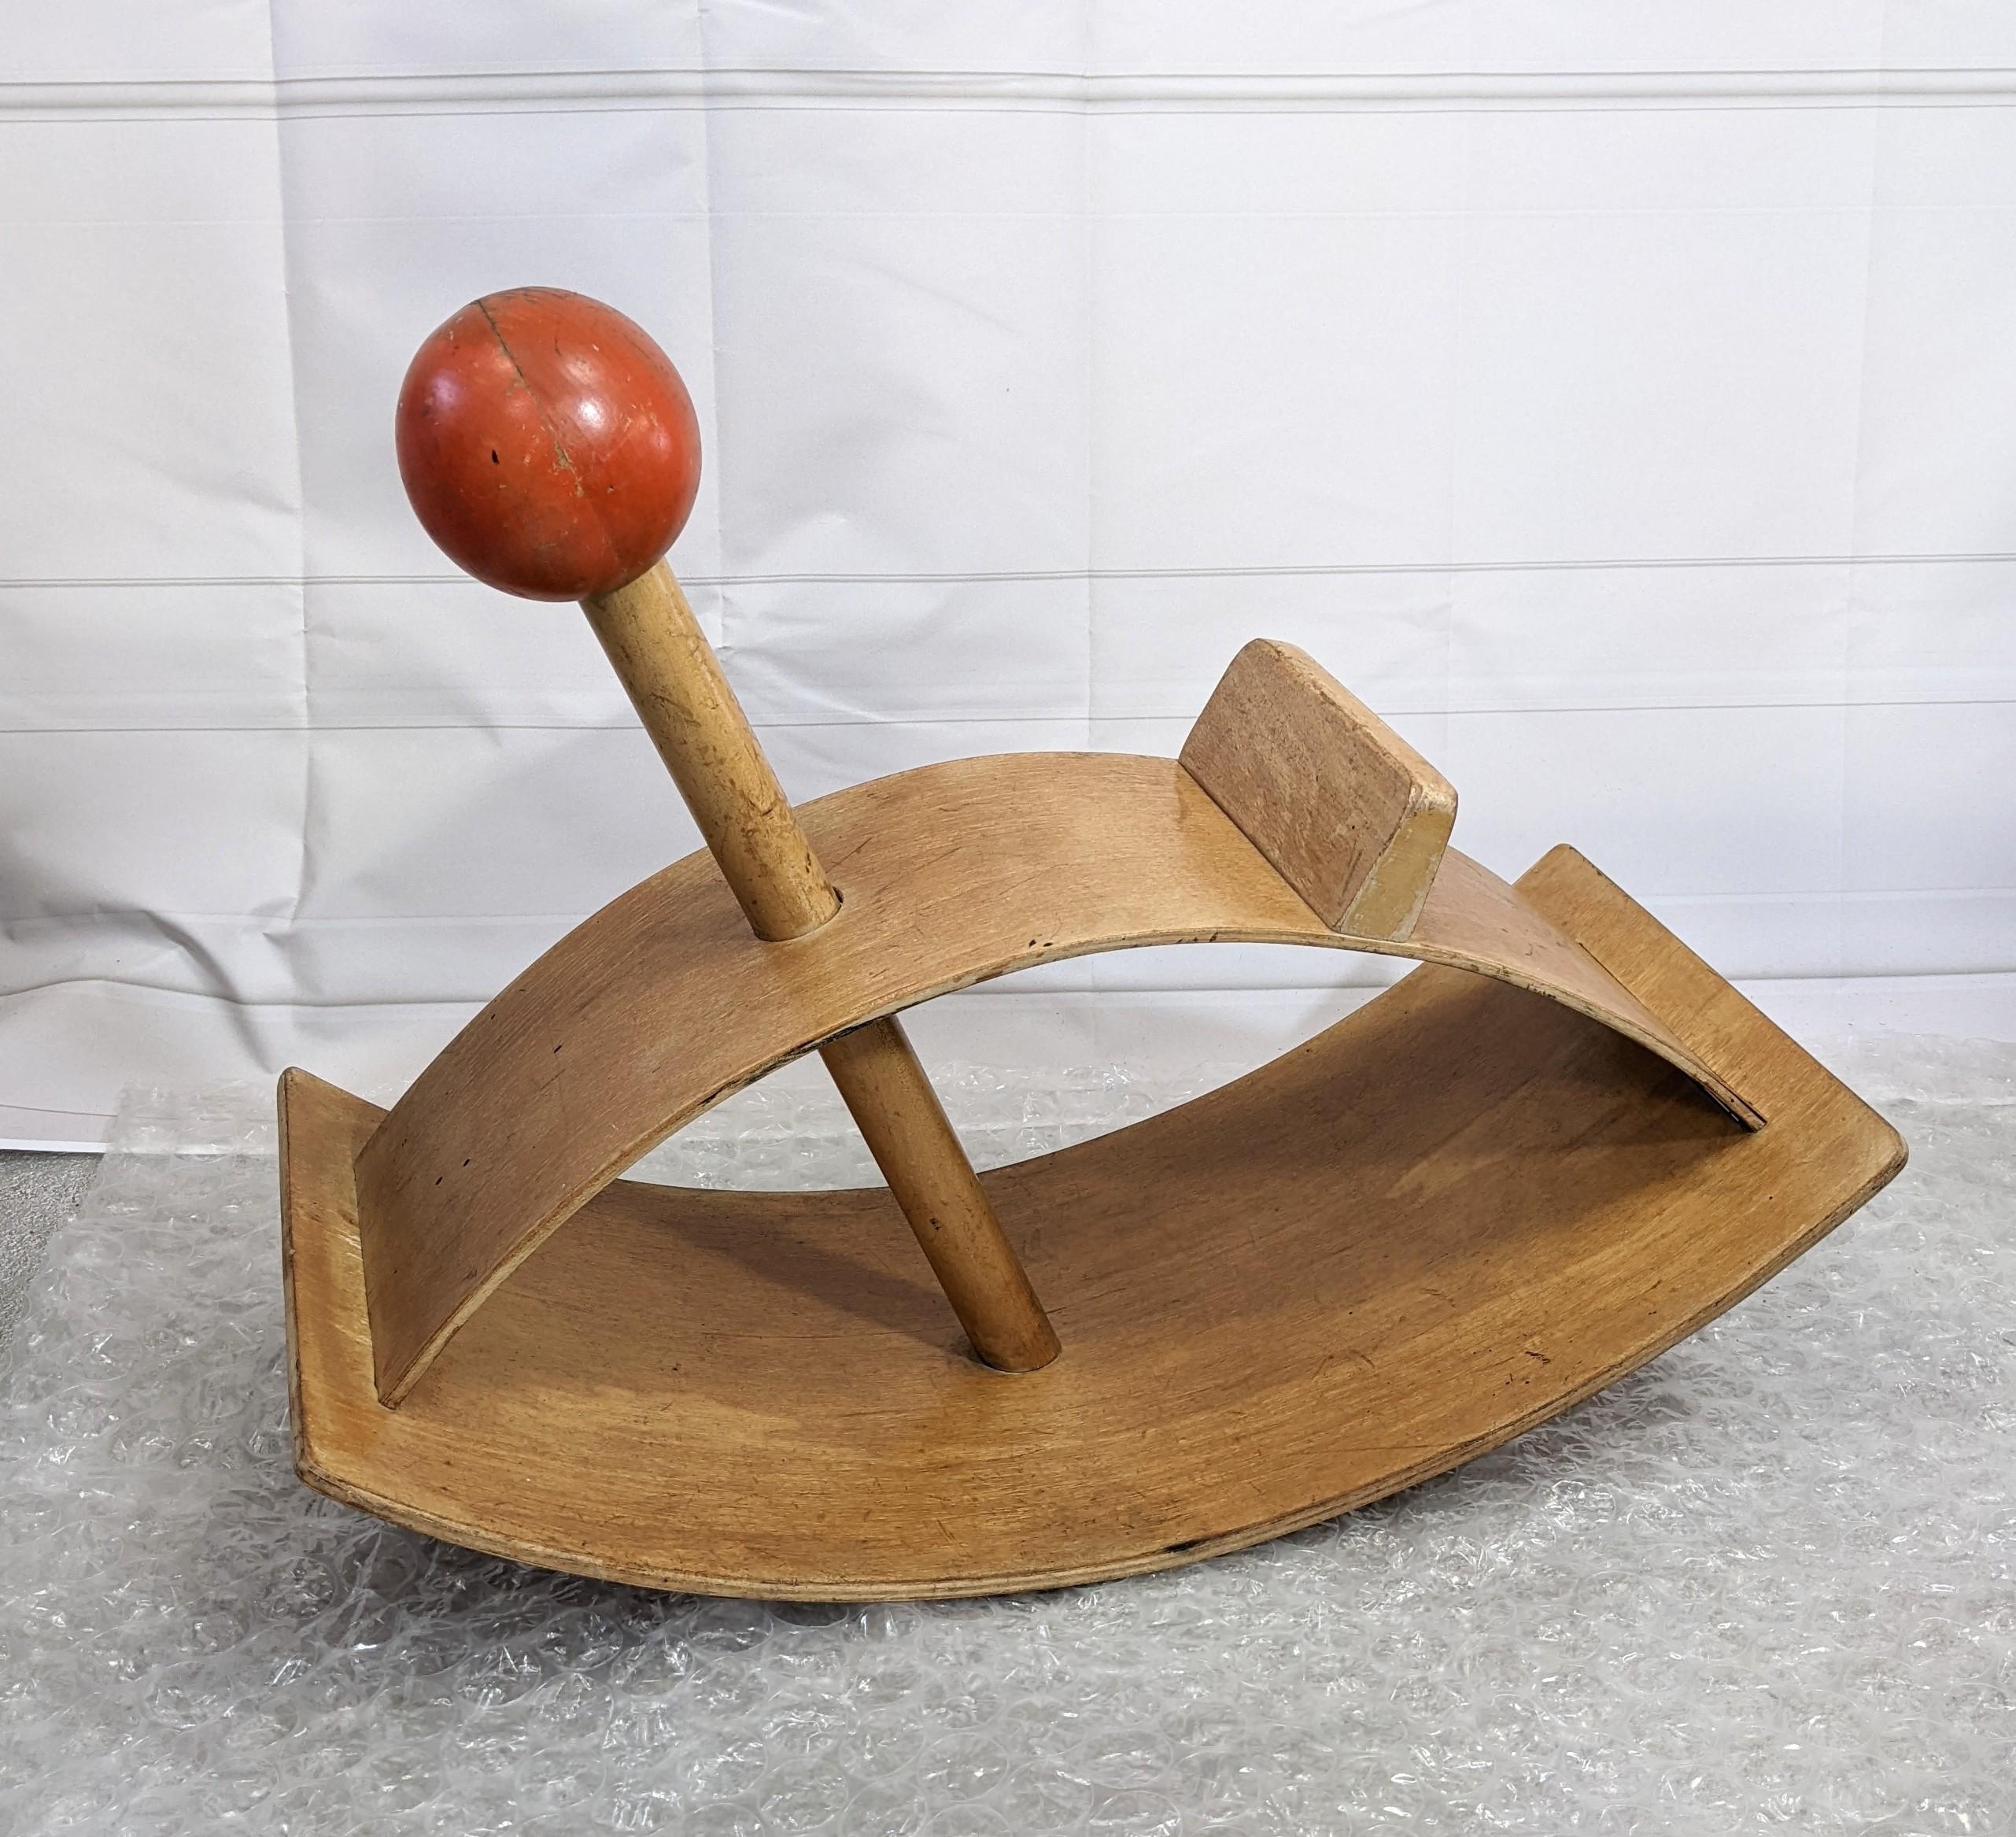 Creative playthings mid century Childs bentwood Rocker designed by Gloria Caranica circa 1964. Iconic design in the collection of the Museum of Modern Art. 
Warm birch plywood. Designed in 1964 USA.

